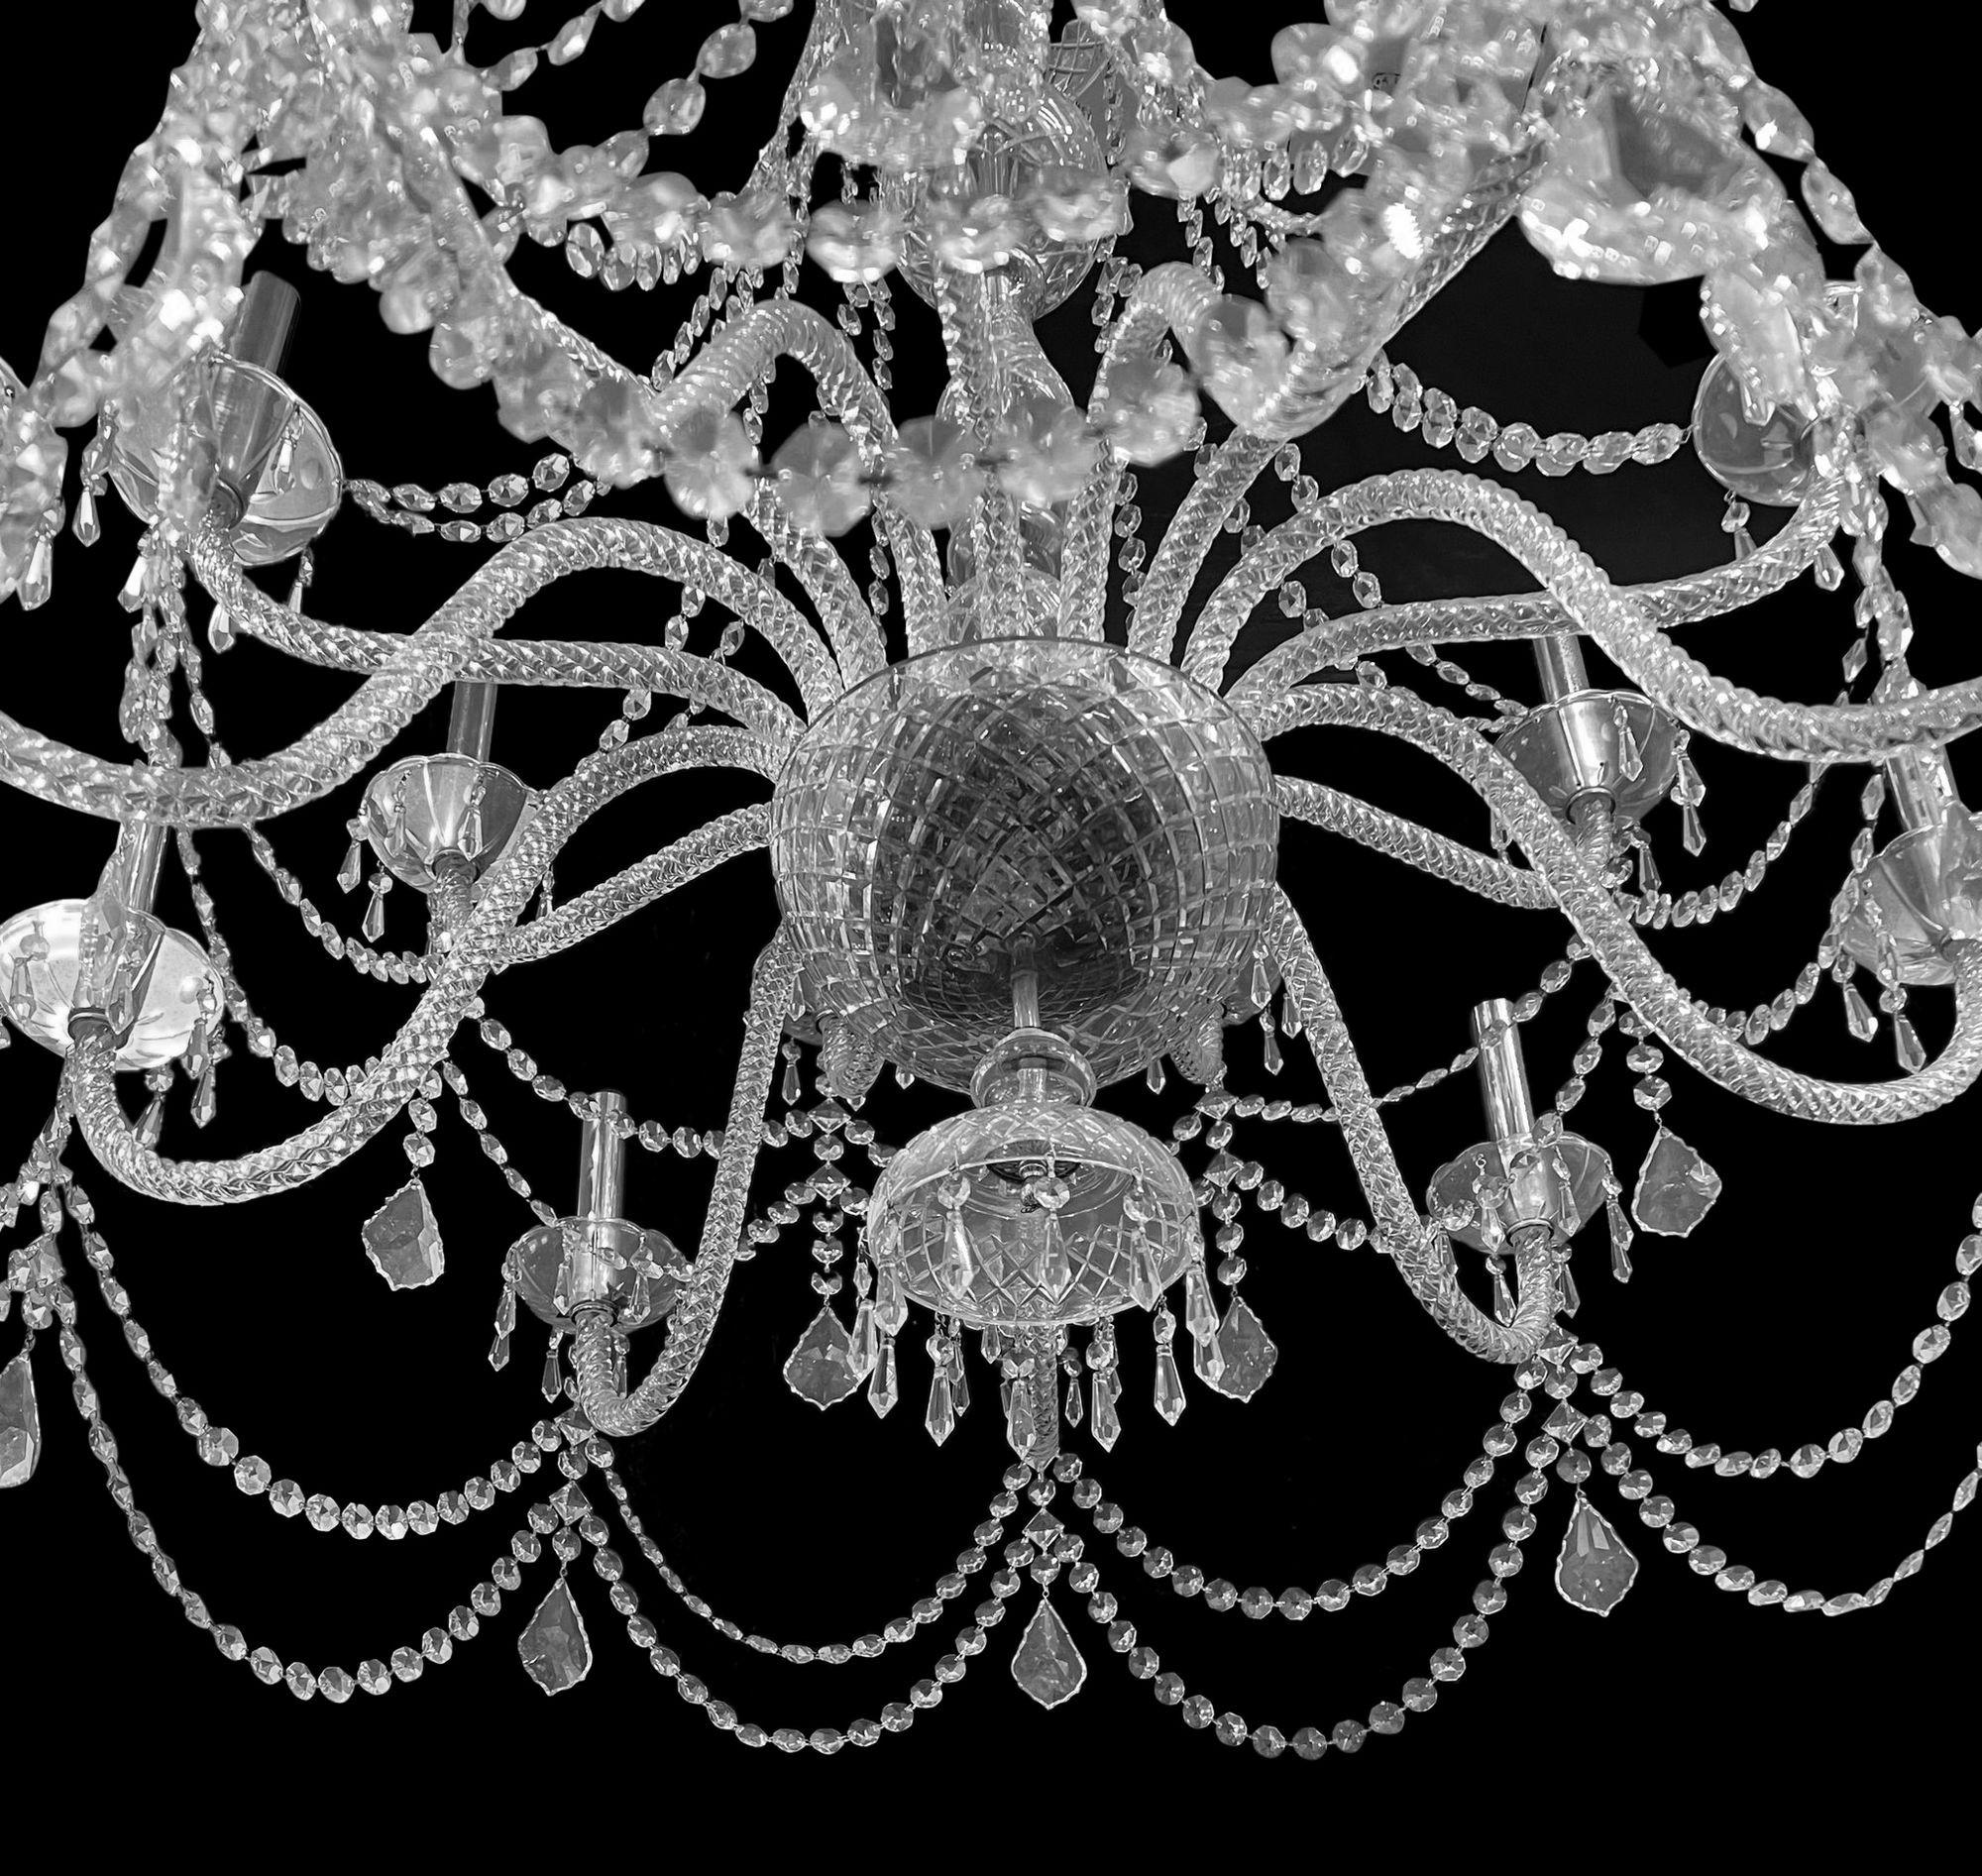 A very impressive George III style cut glass 20 branch chandelier. 
The shaped glass bowl issuing spiral rods suspending faceted drops, swags and chains above a slender baluster stem and bowl, issuing two tiers of twenty S-scrolled spiral cut arms